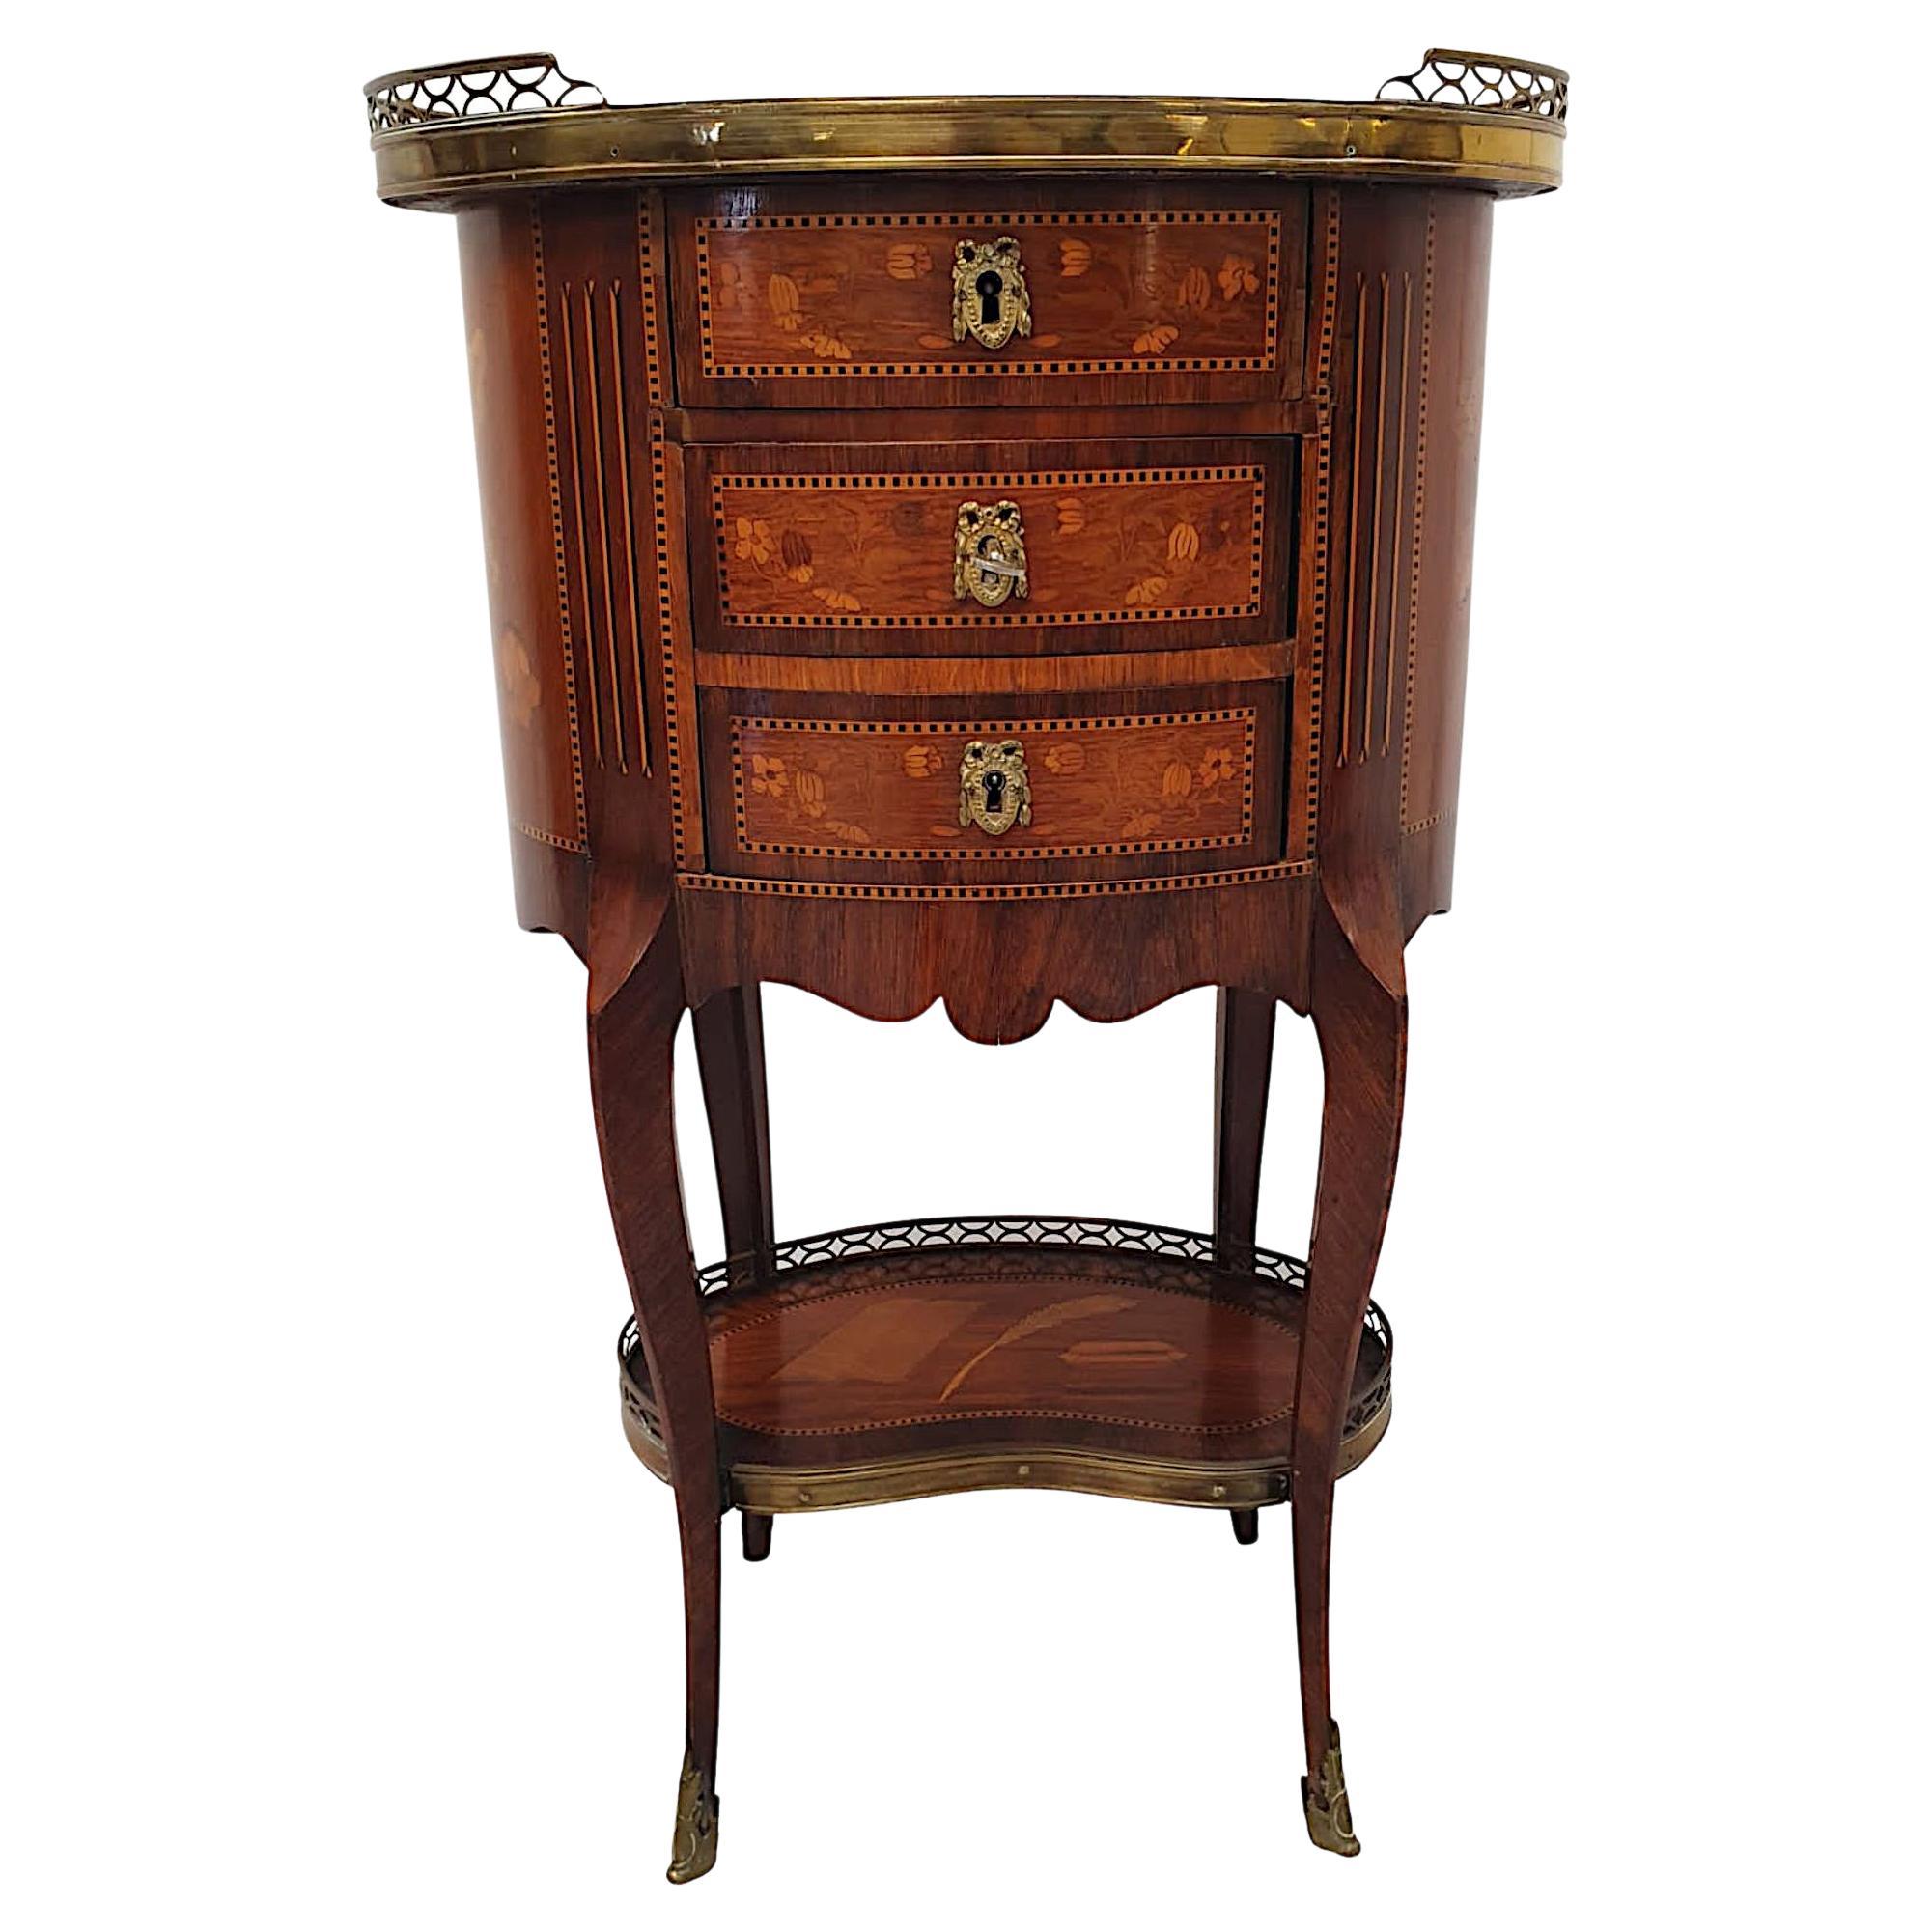 Fabulous 19th Century Inlaid Marble Top Cabinet with Ormolu Mounts For Sale